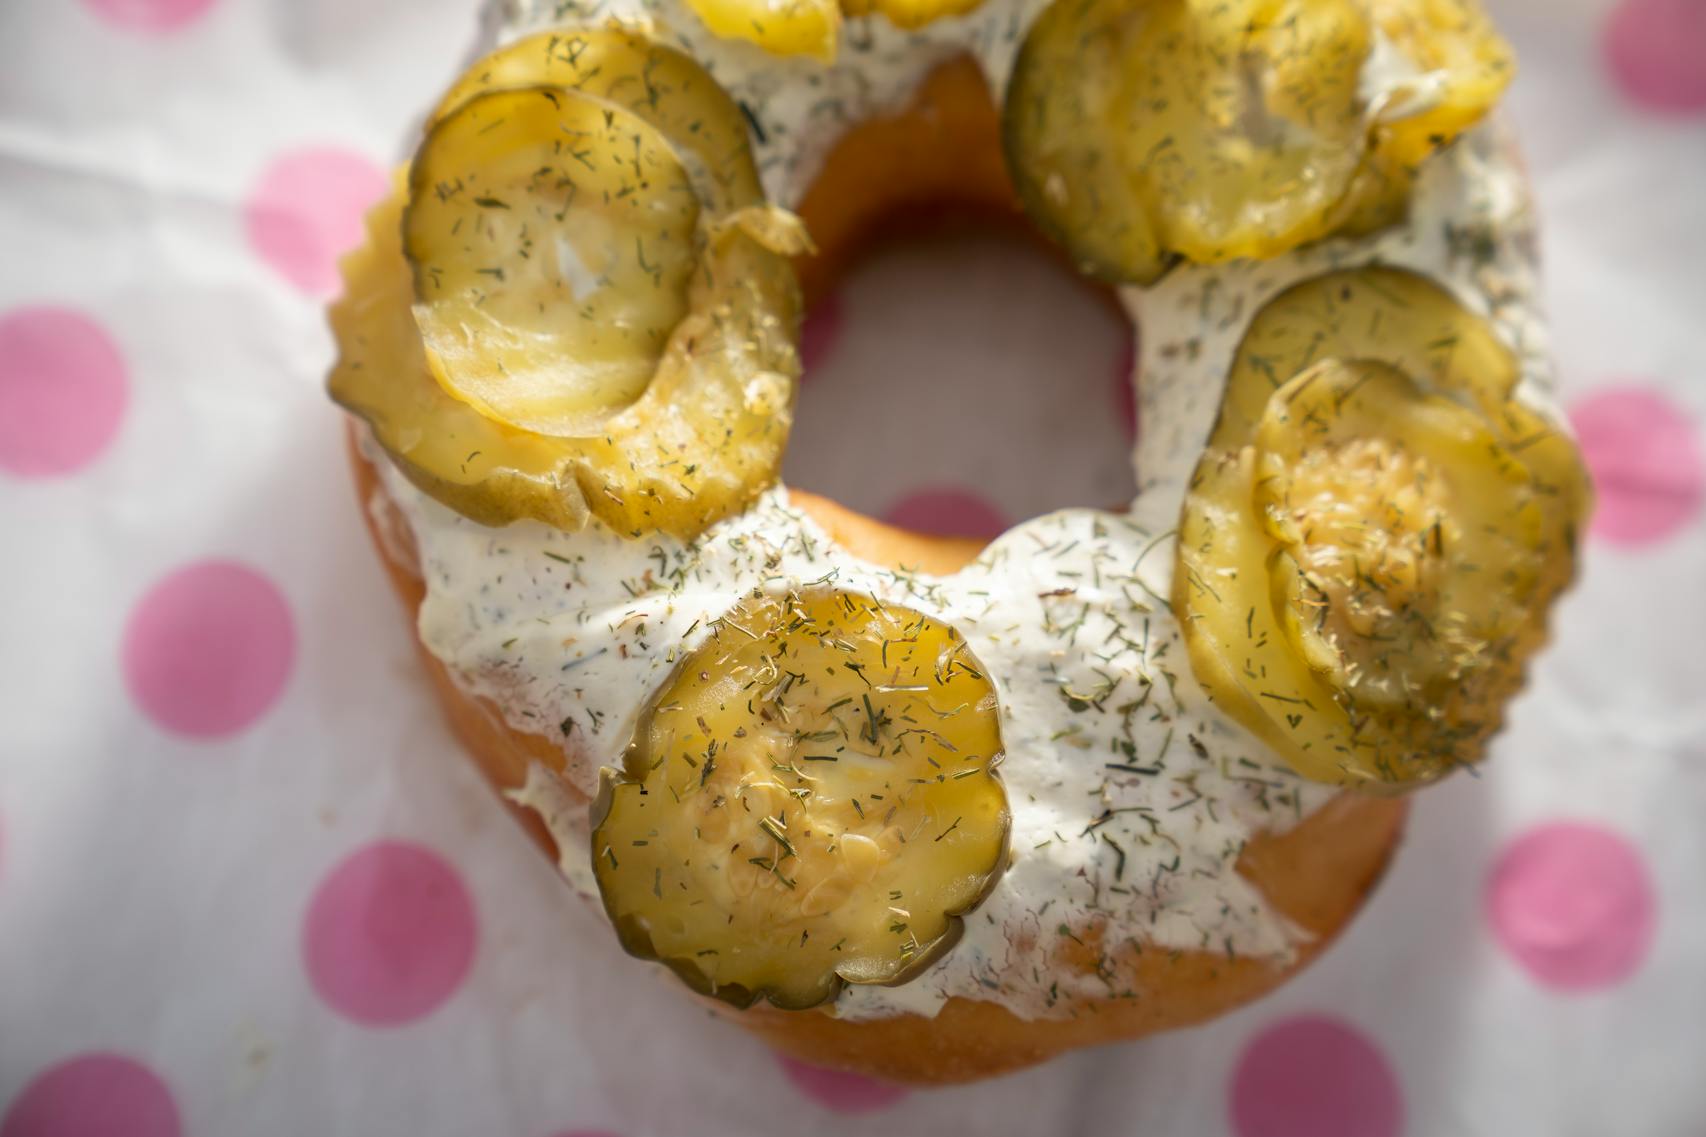 Dill Pickle Donut from Fluffy’s Hand-Cut Donuts. The new foods of the 2023 Minnesota State Fair photographed on the first day of the fair in Falcon Heights, Minn. on Tuesday, Aug. 8, 2023. ] LEILA NAVIDI • leila.navidi@startribune.com